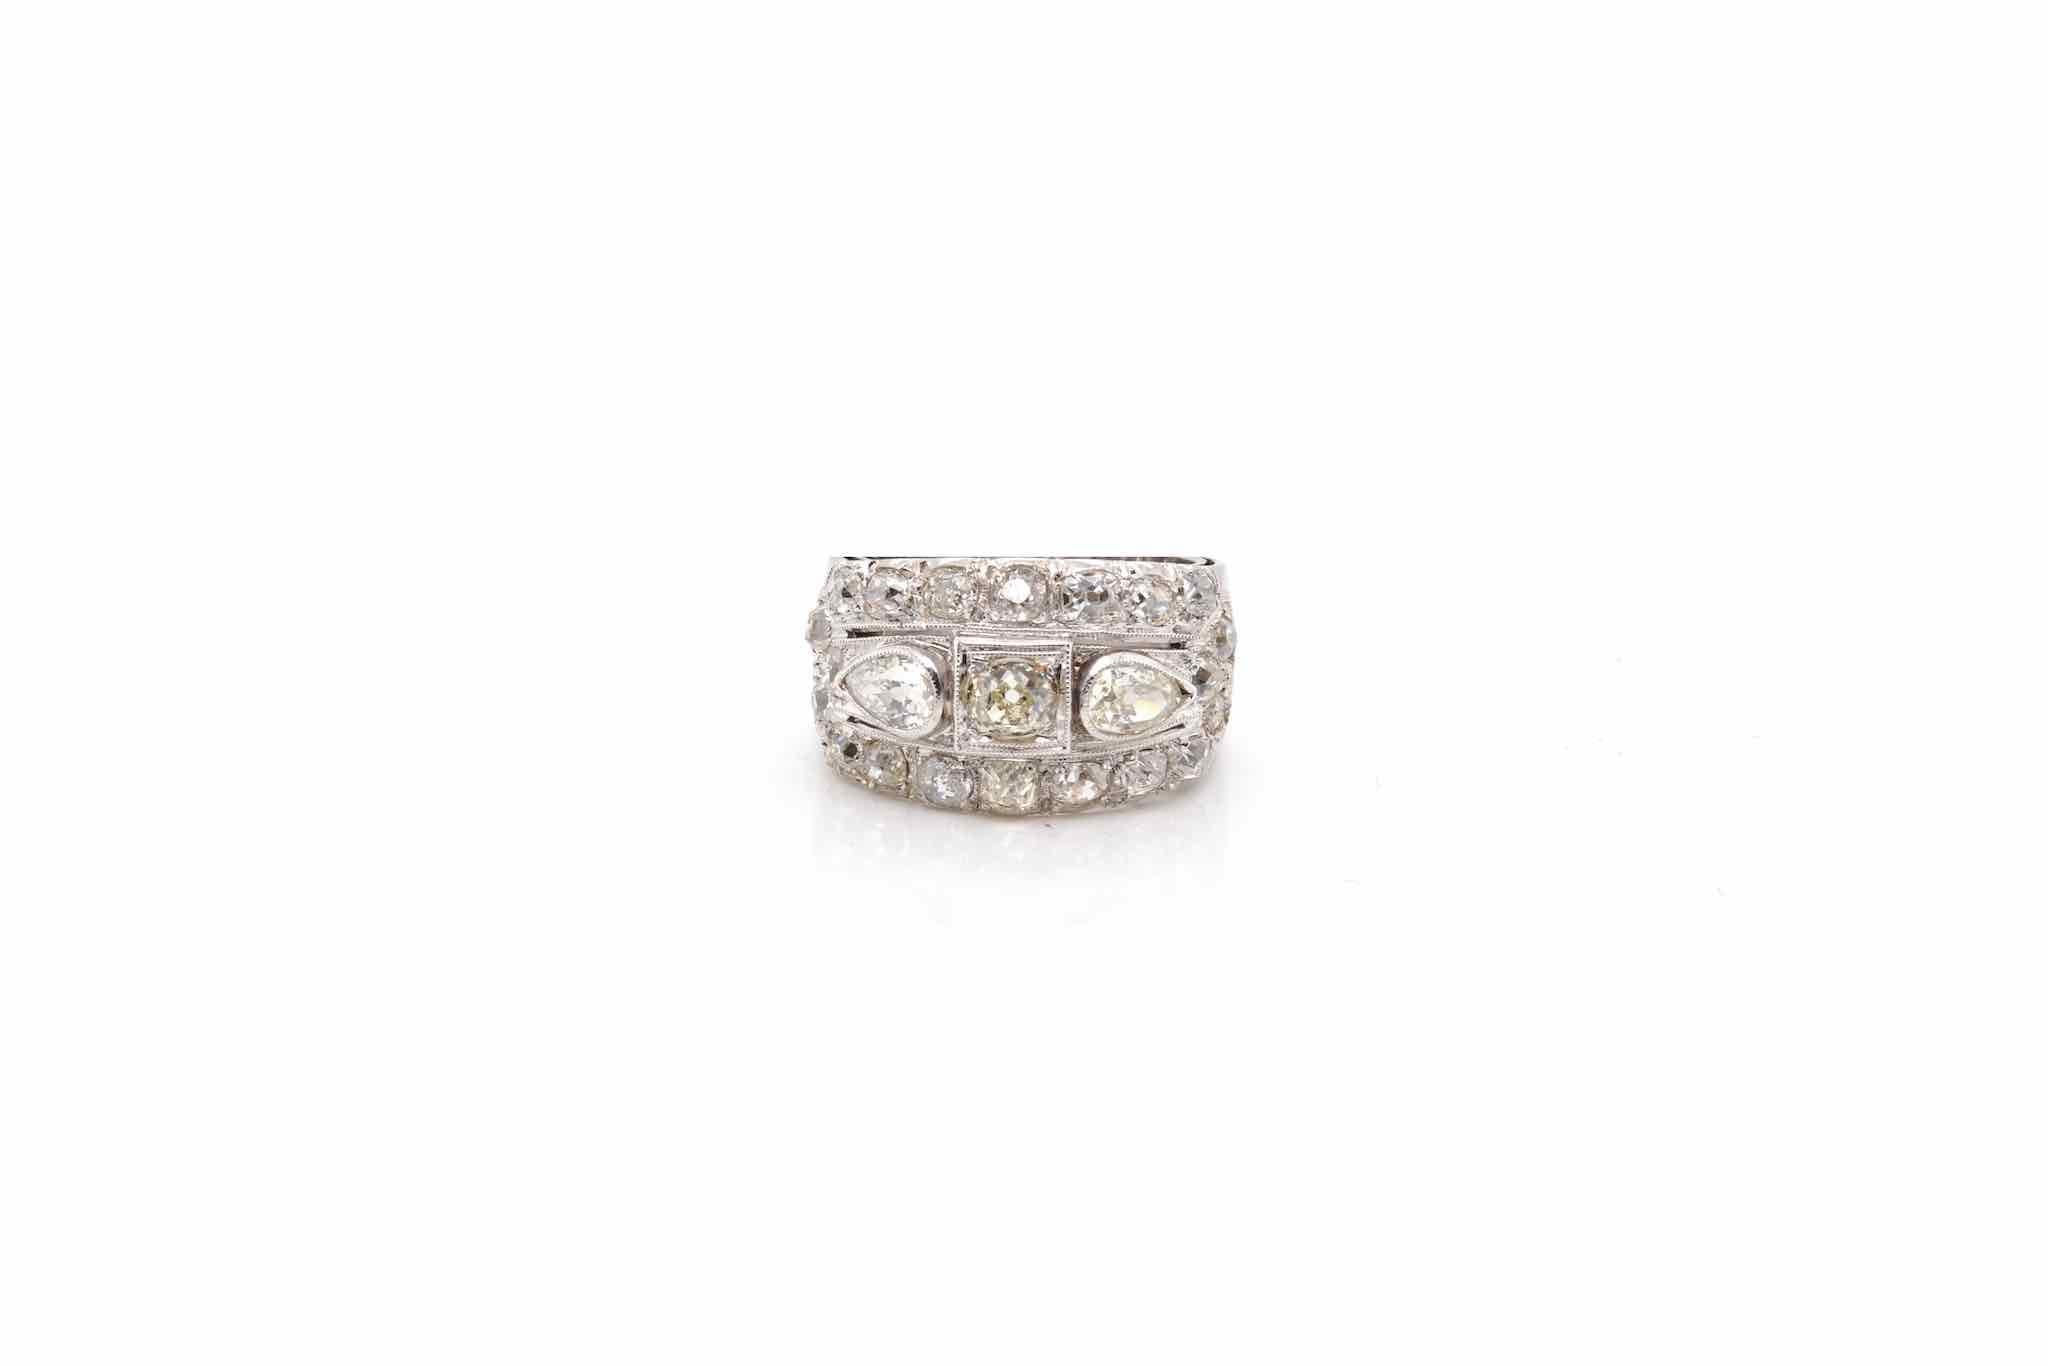 Stones: Old cut diamonds
and pears for a total weight of 1.80 carats.
Material: 18k white gold
Dimensions: 14 mm length on finger
Weight: 10g
Size: 59 (free sizing)
Certificate
Ref. : 24629